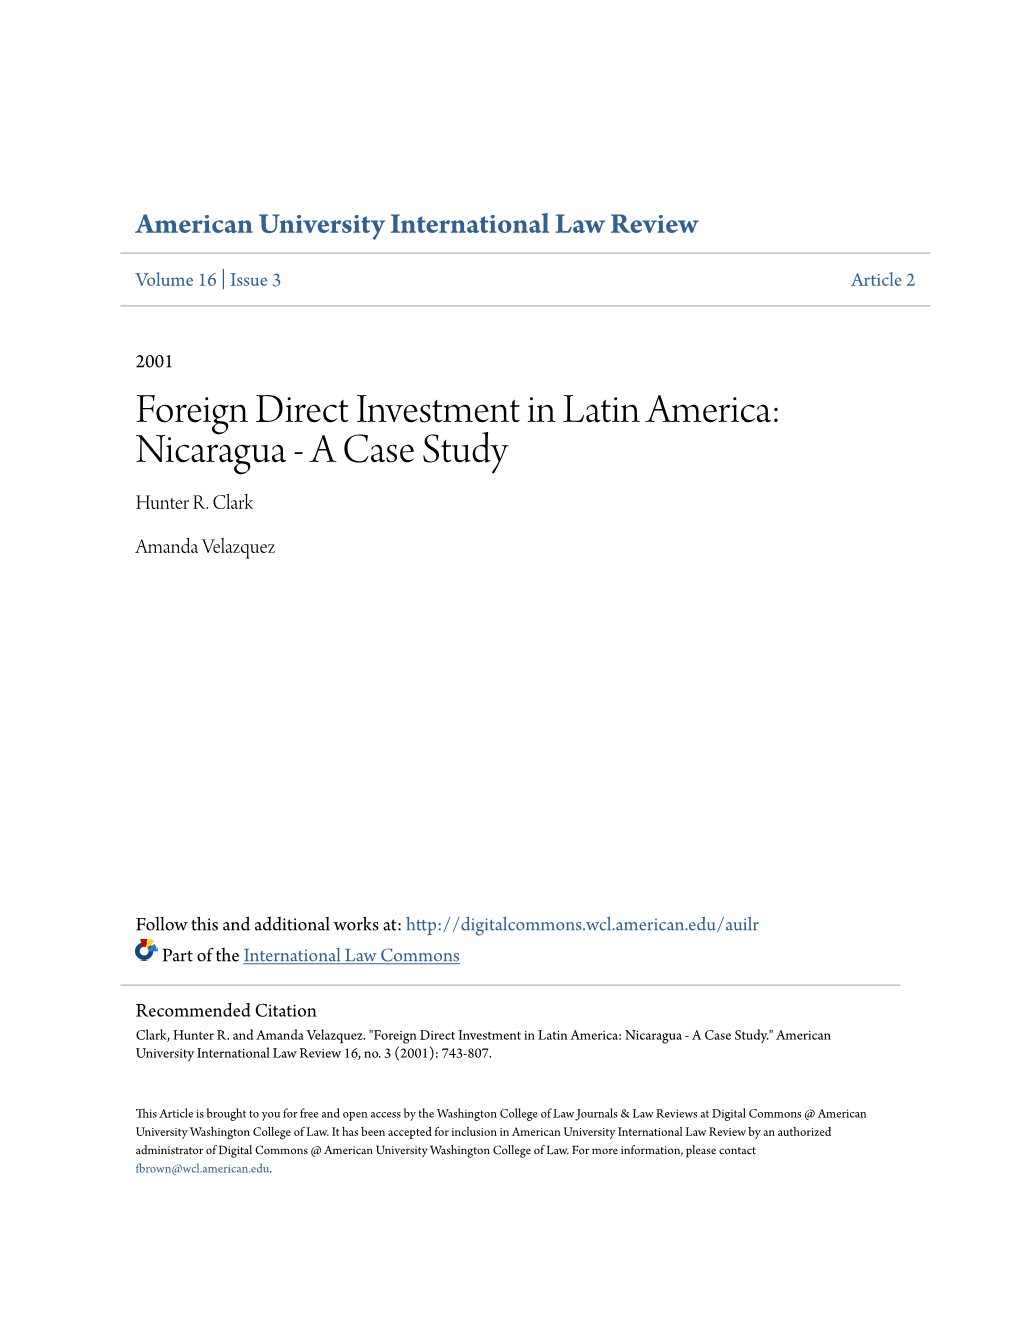 Foreign Direct Investment in Latin America: Nicaragua - a Case Study Hunter R